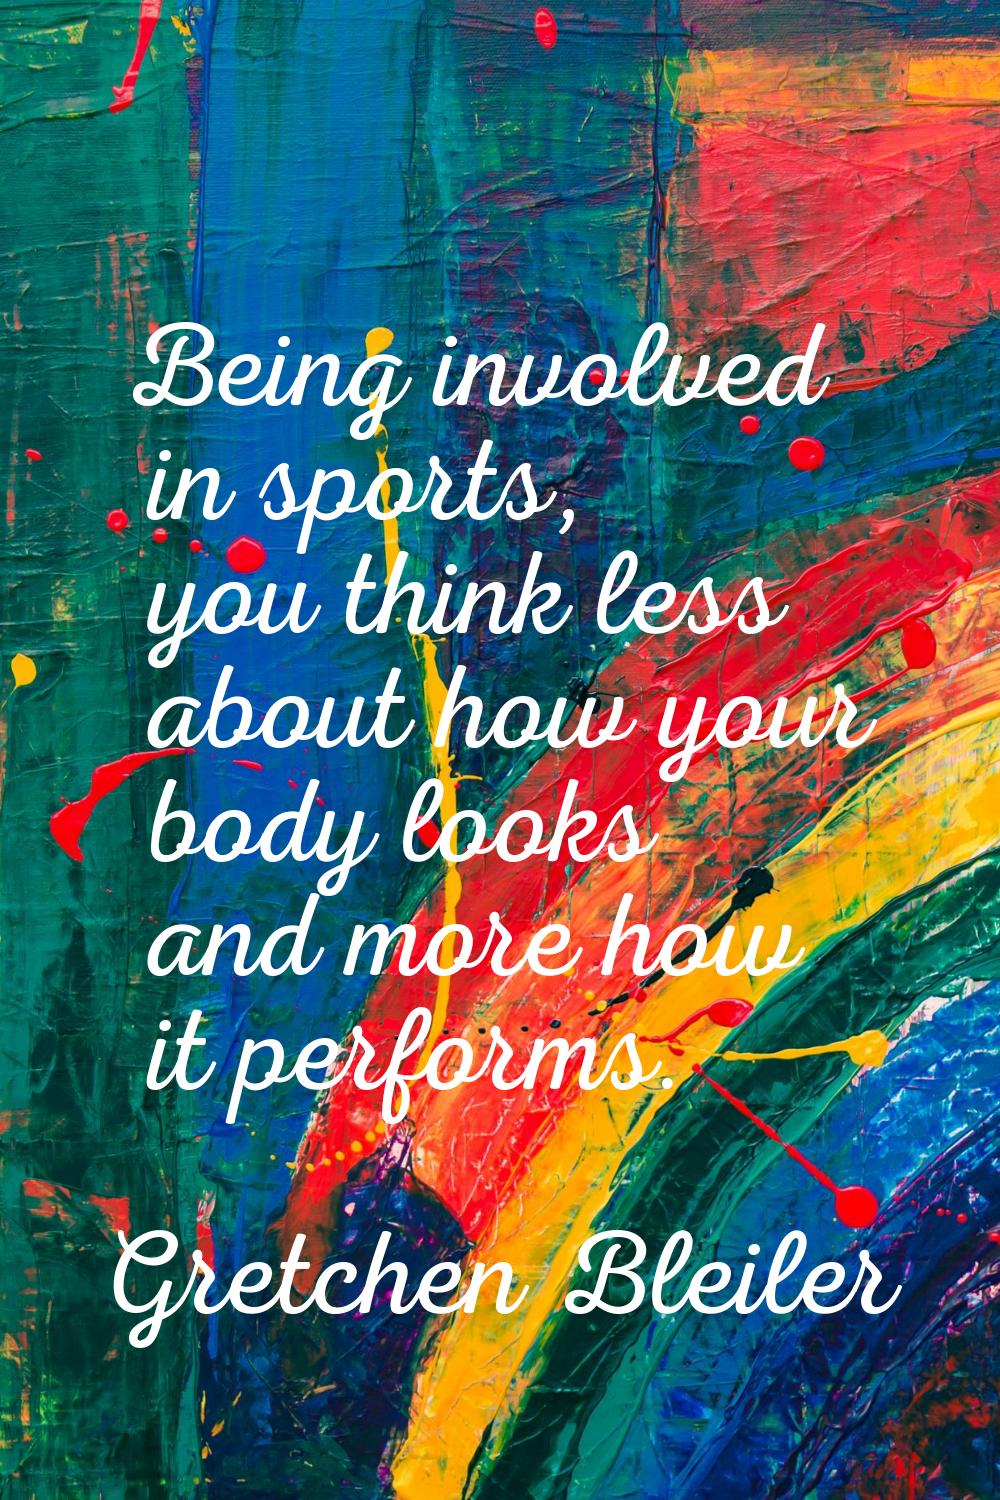 Being involved in sports, you think less about how your body looks and more how it performs.